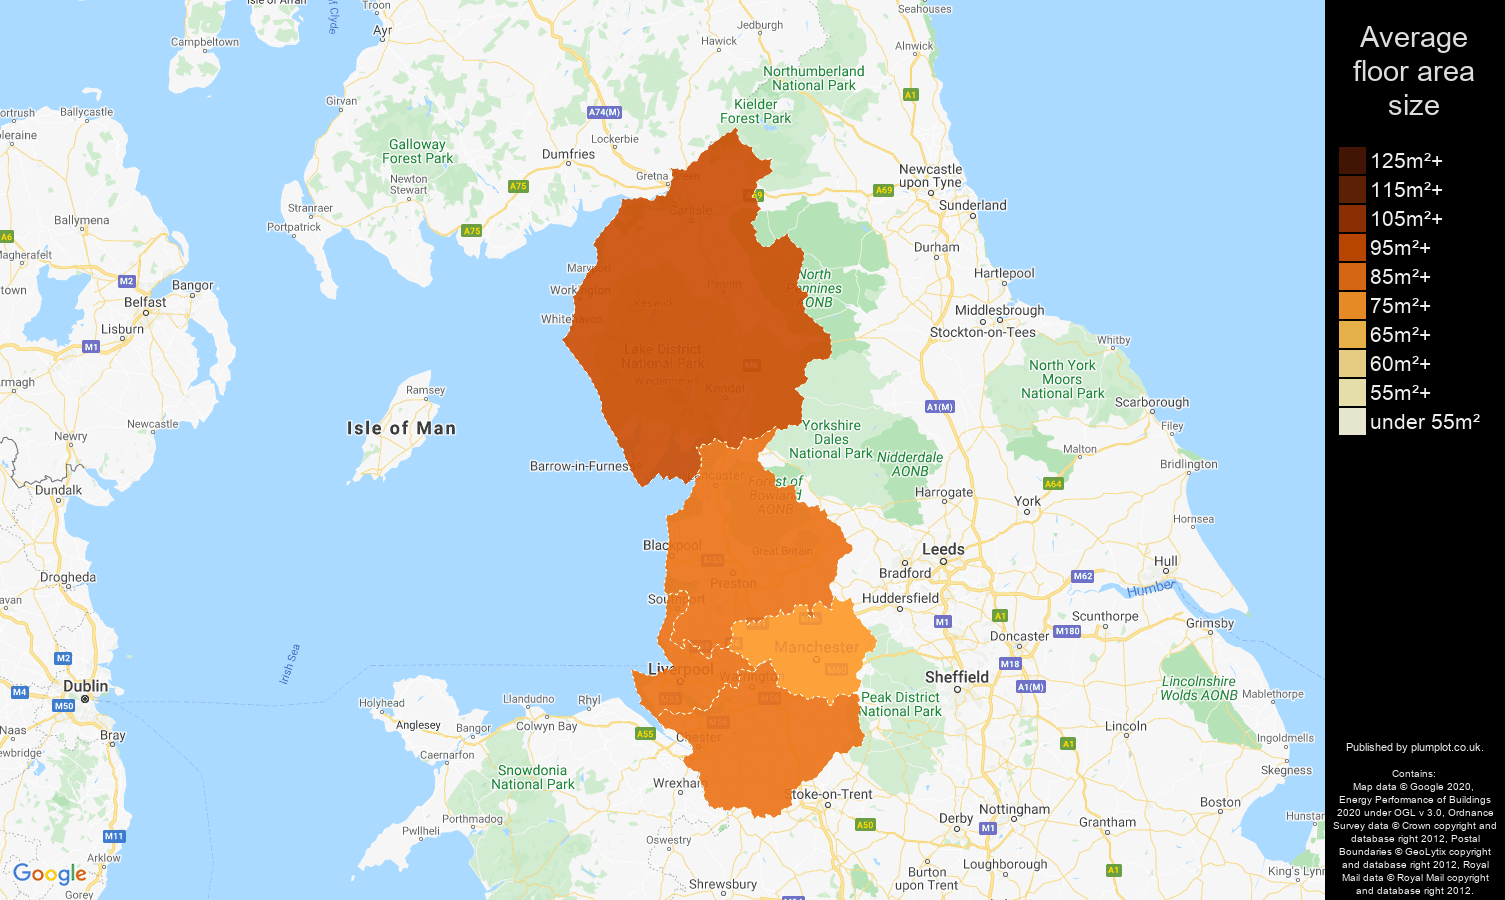 North West map of average floor area size of properties